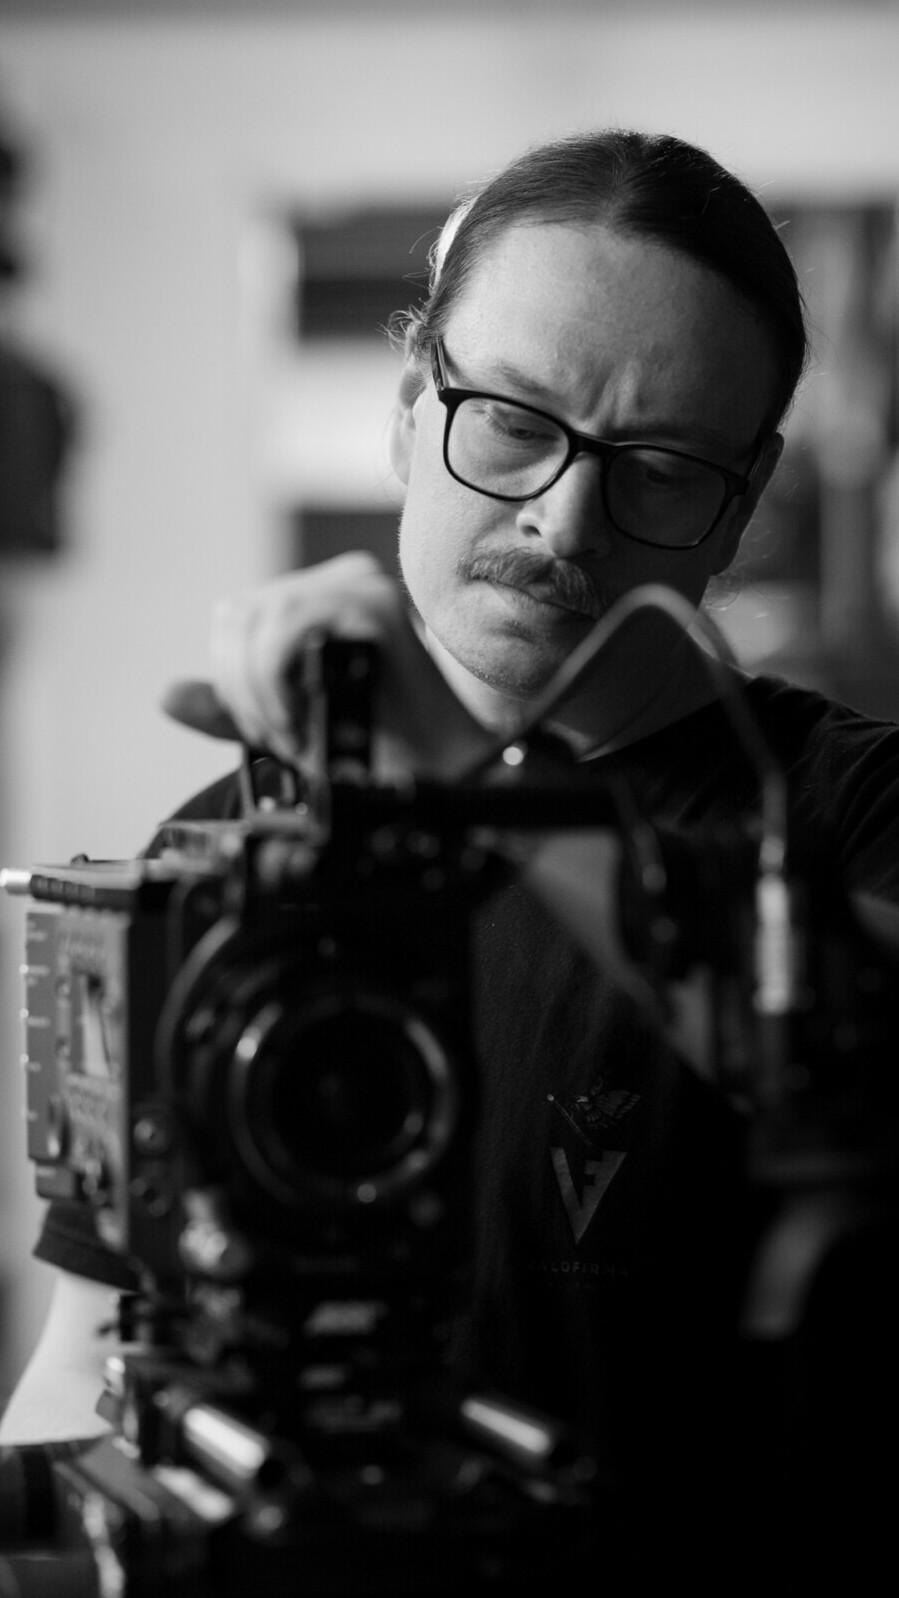 Man in glasses standing behind a camera